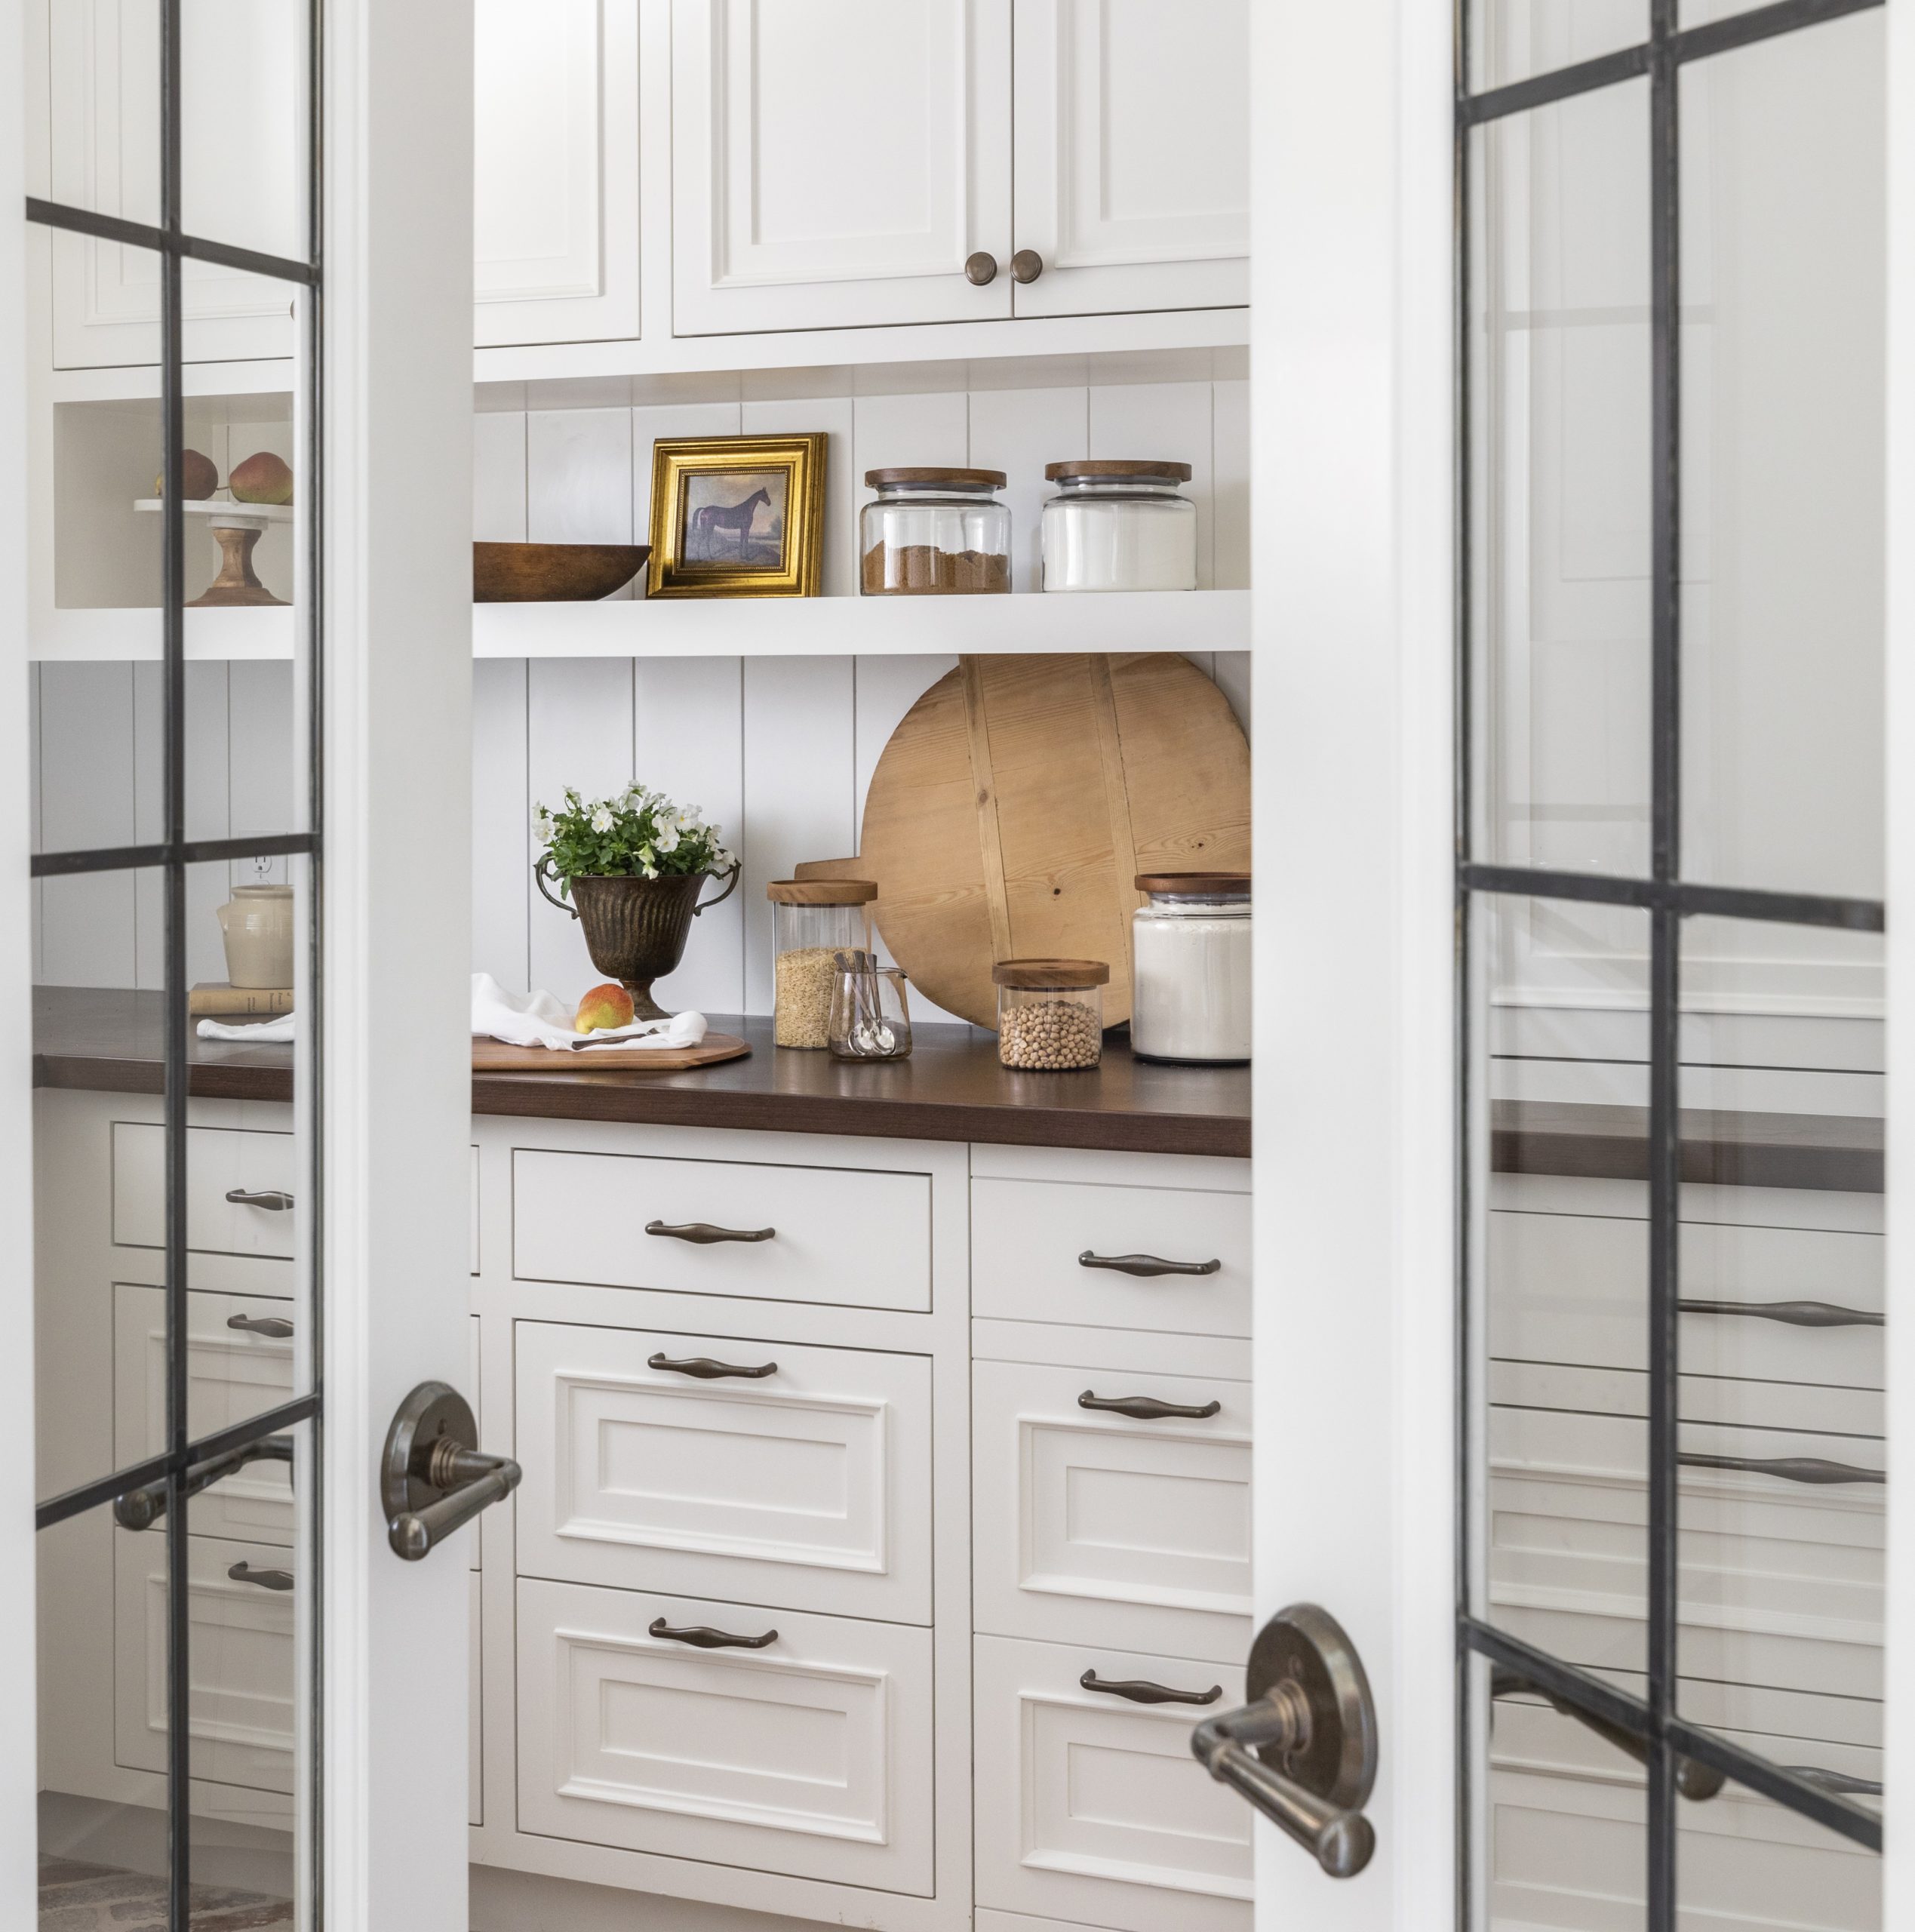 Family-Friendly Living - Butler's Pantry - Marie Flanigan Interiors